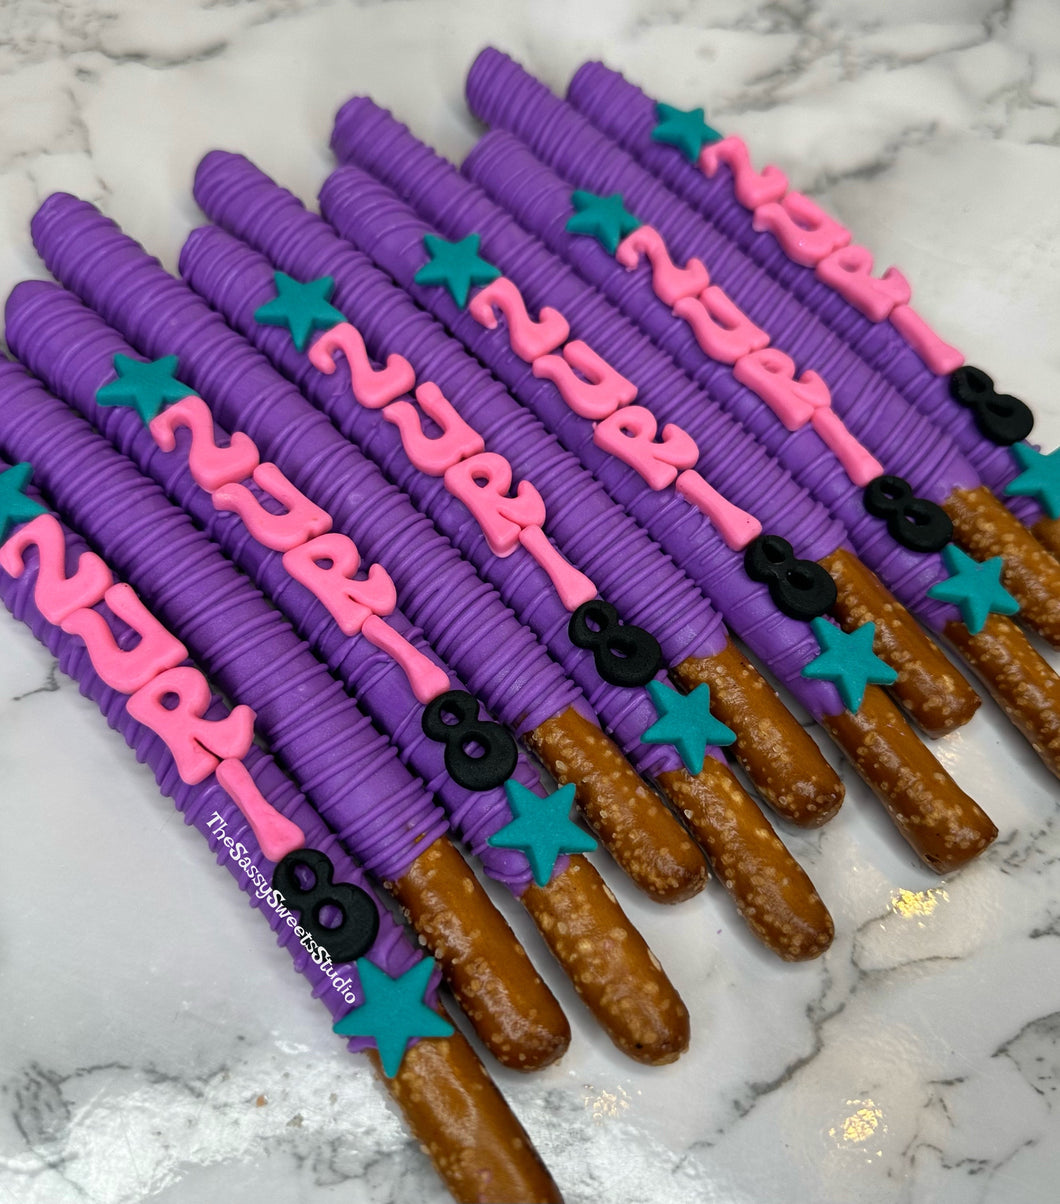 Decorated: Chocolate Covered Pretzel Rods